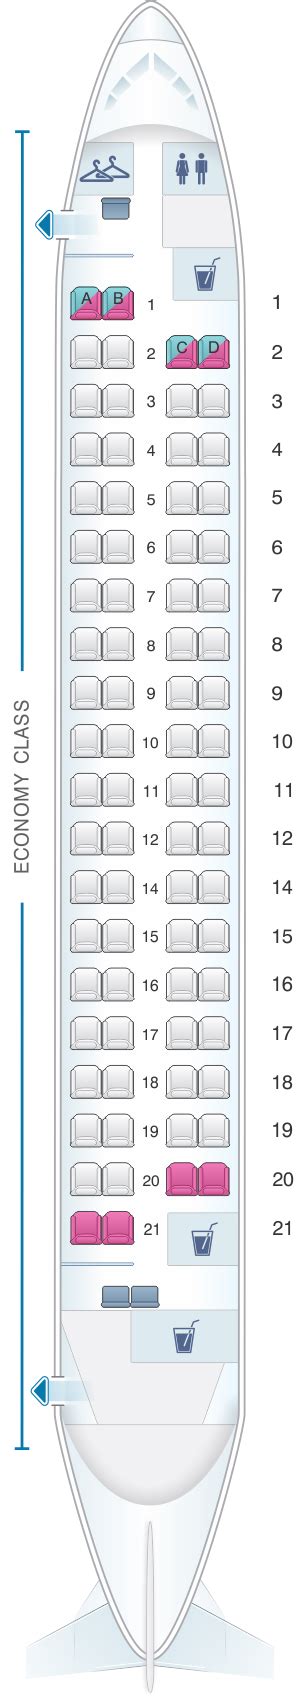 Seat Map Philippine Airlines Bombardier Q400